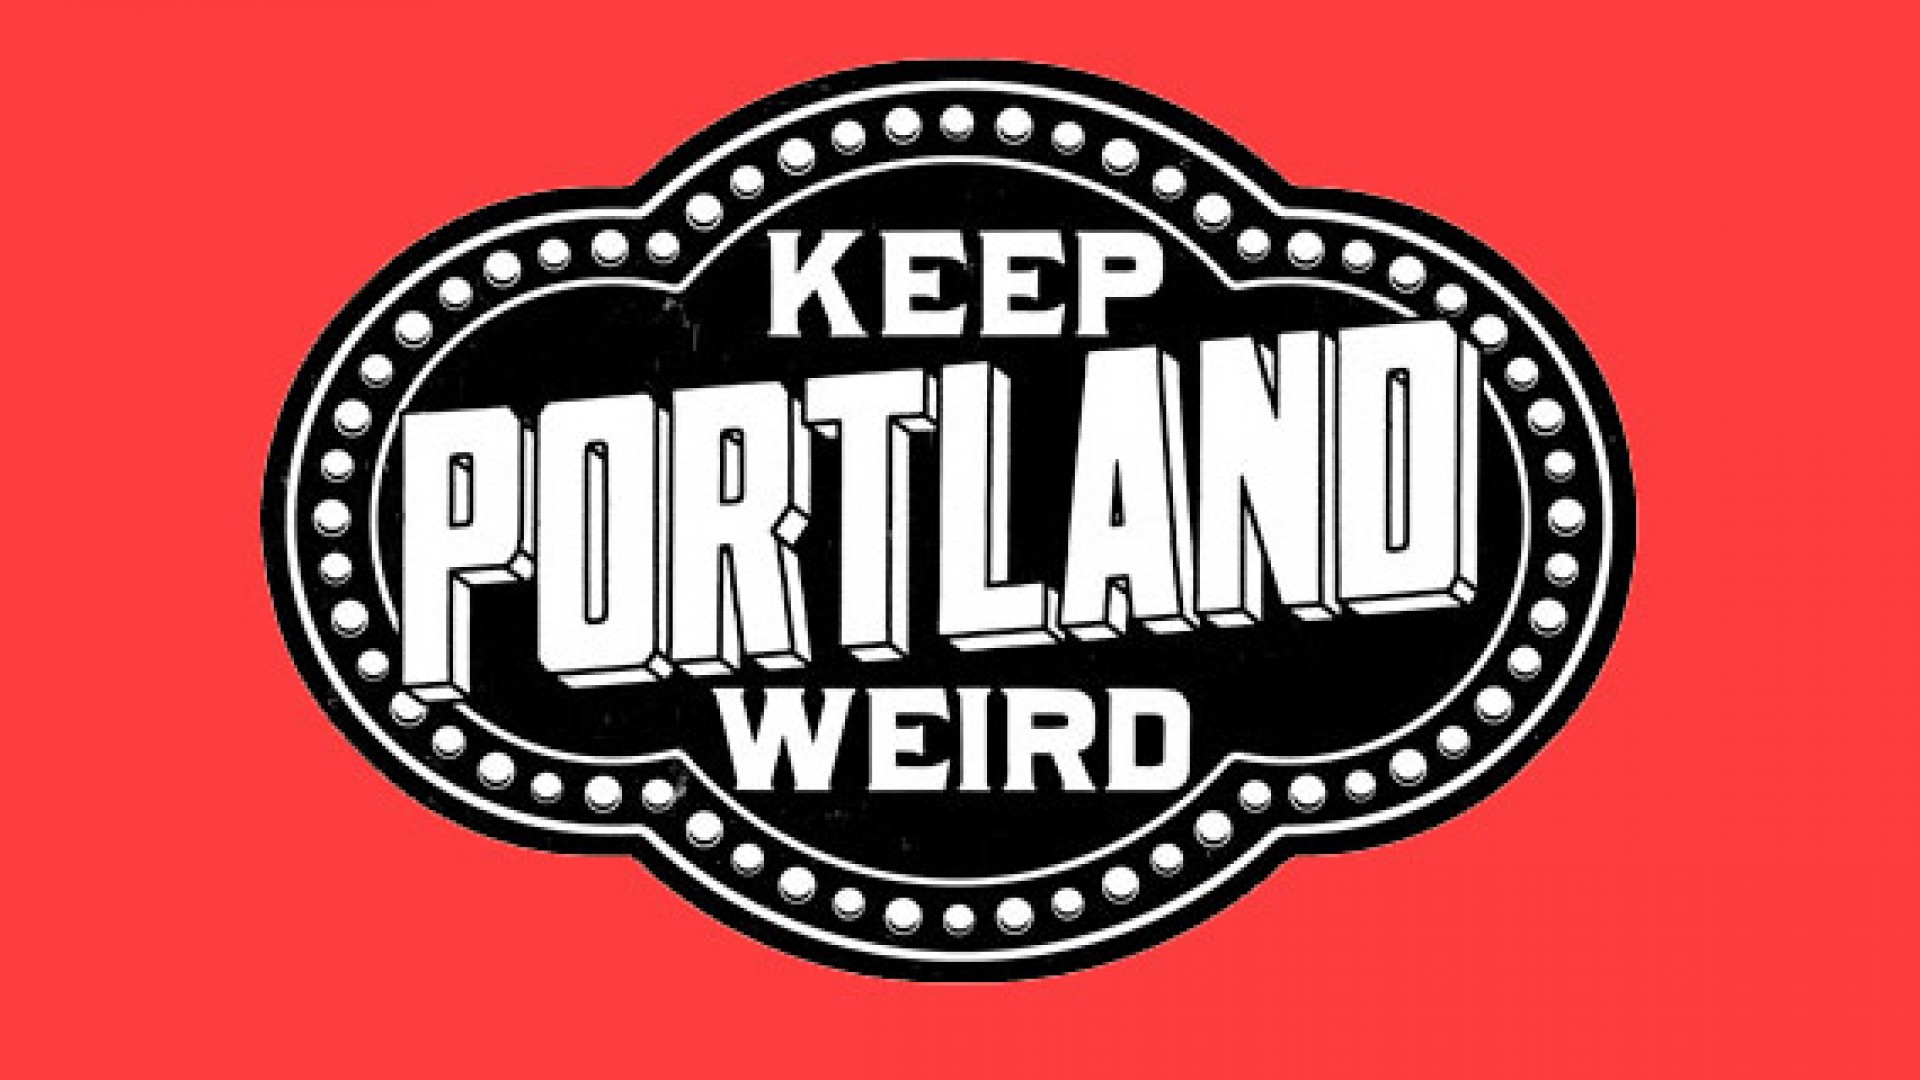 How did Portland get to be so creative?